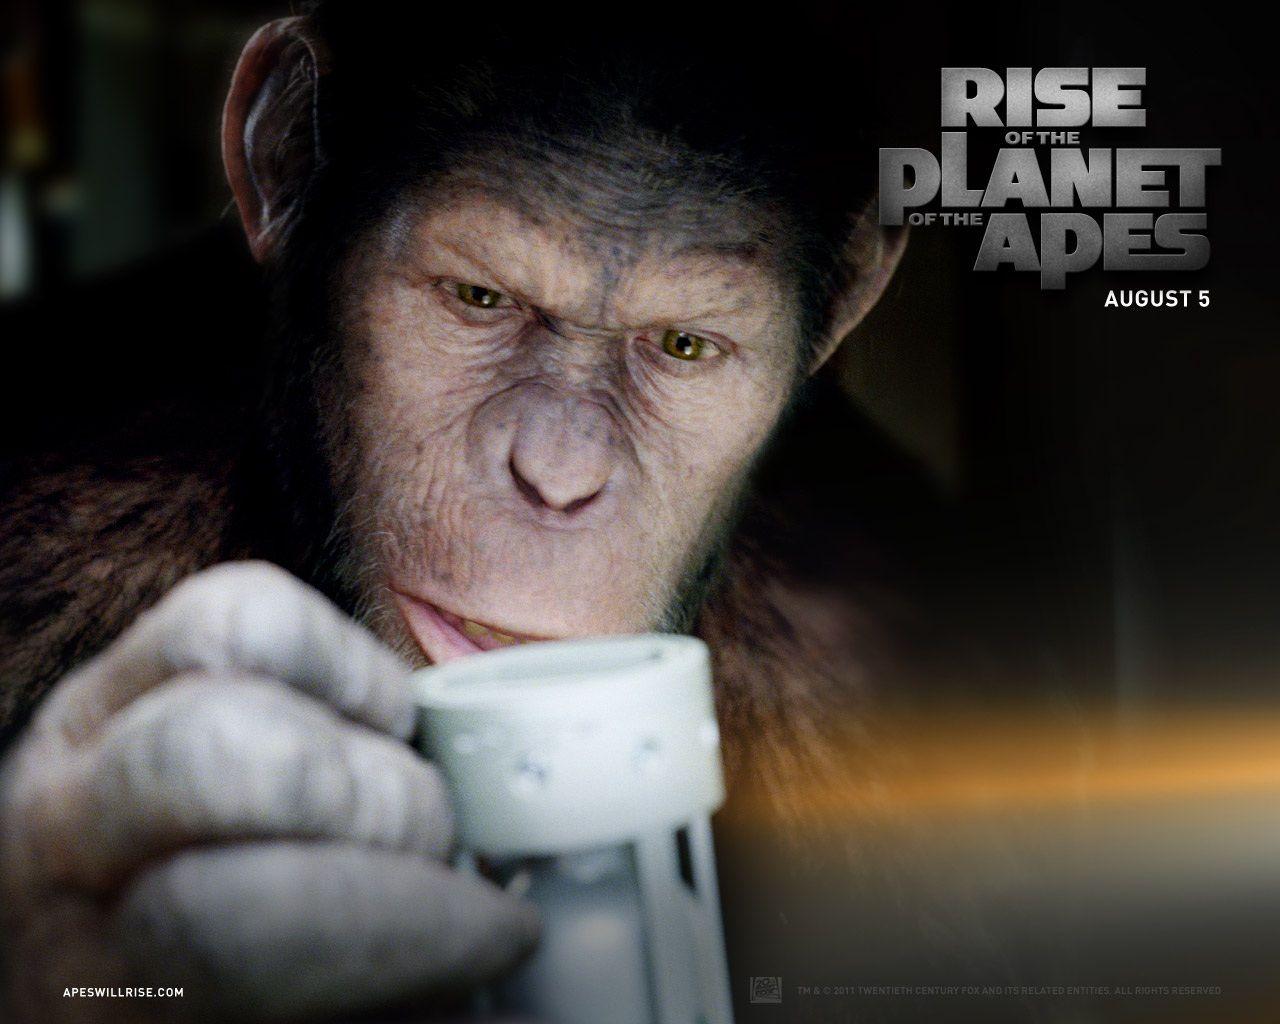 Why Caesar Looks So Human in Rise of the Planet of the Apes